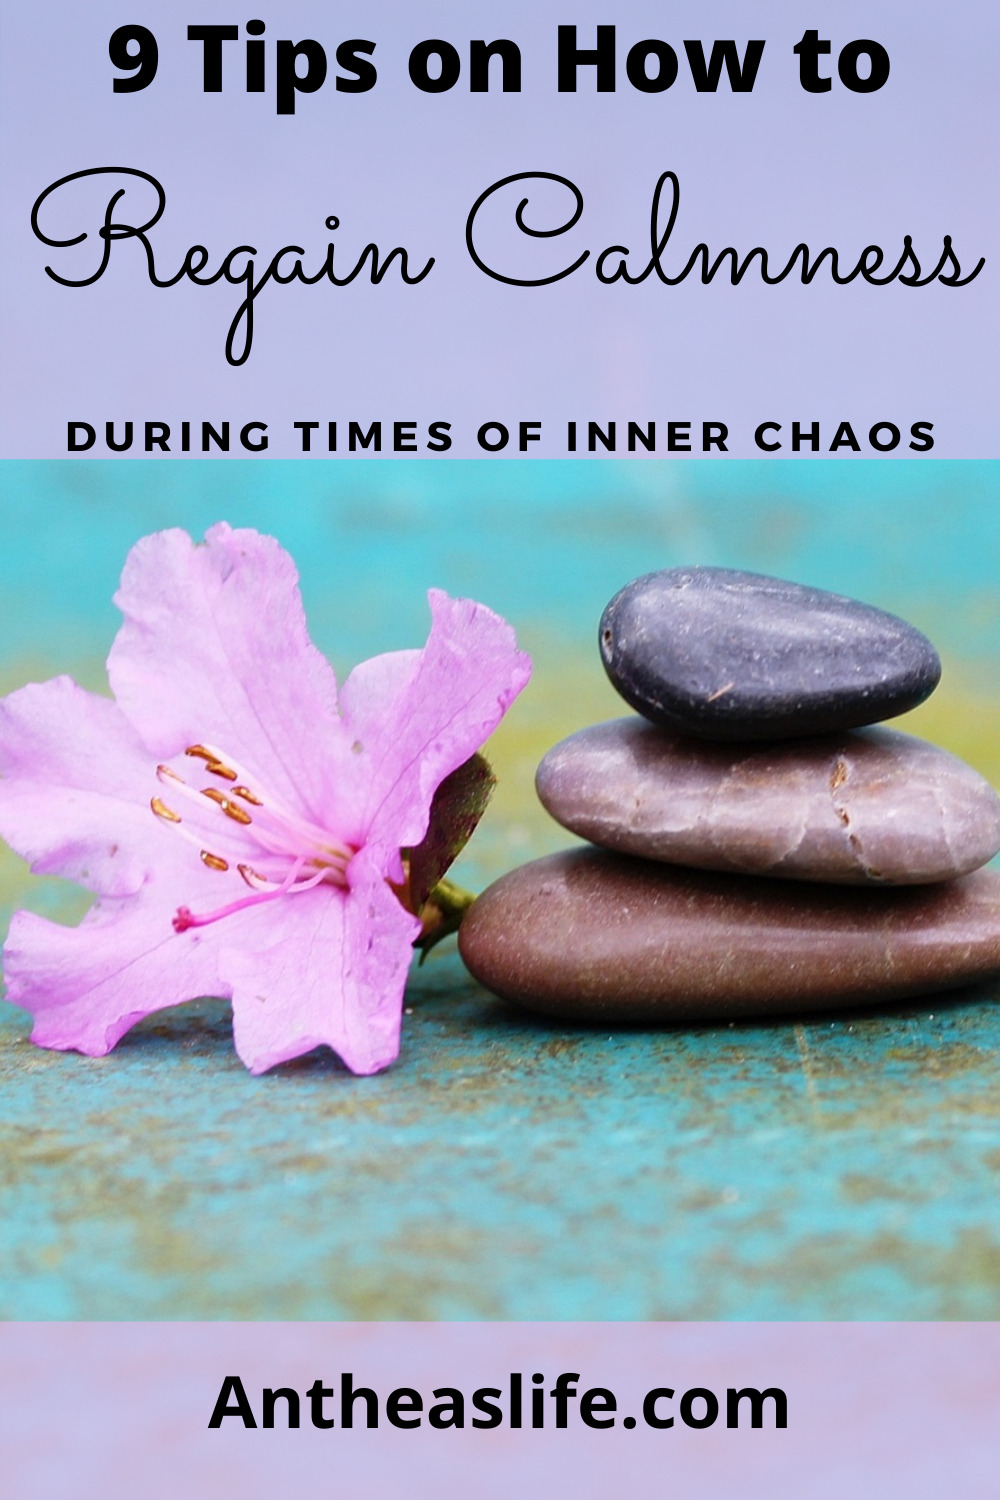 9-tips-on-how-to-regain-calmness-during-times-of-inner-chaos